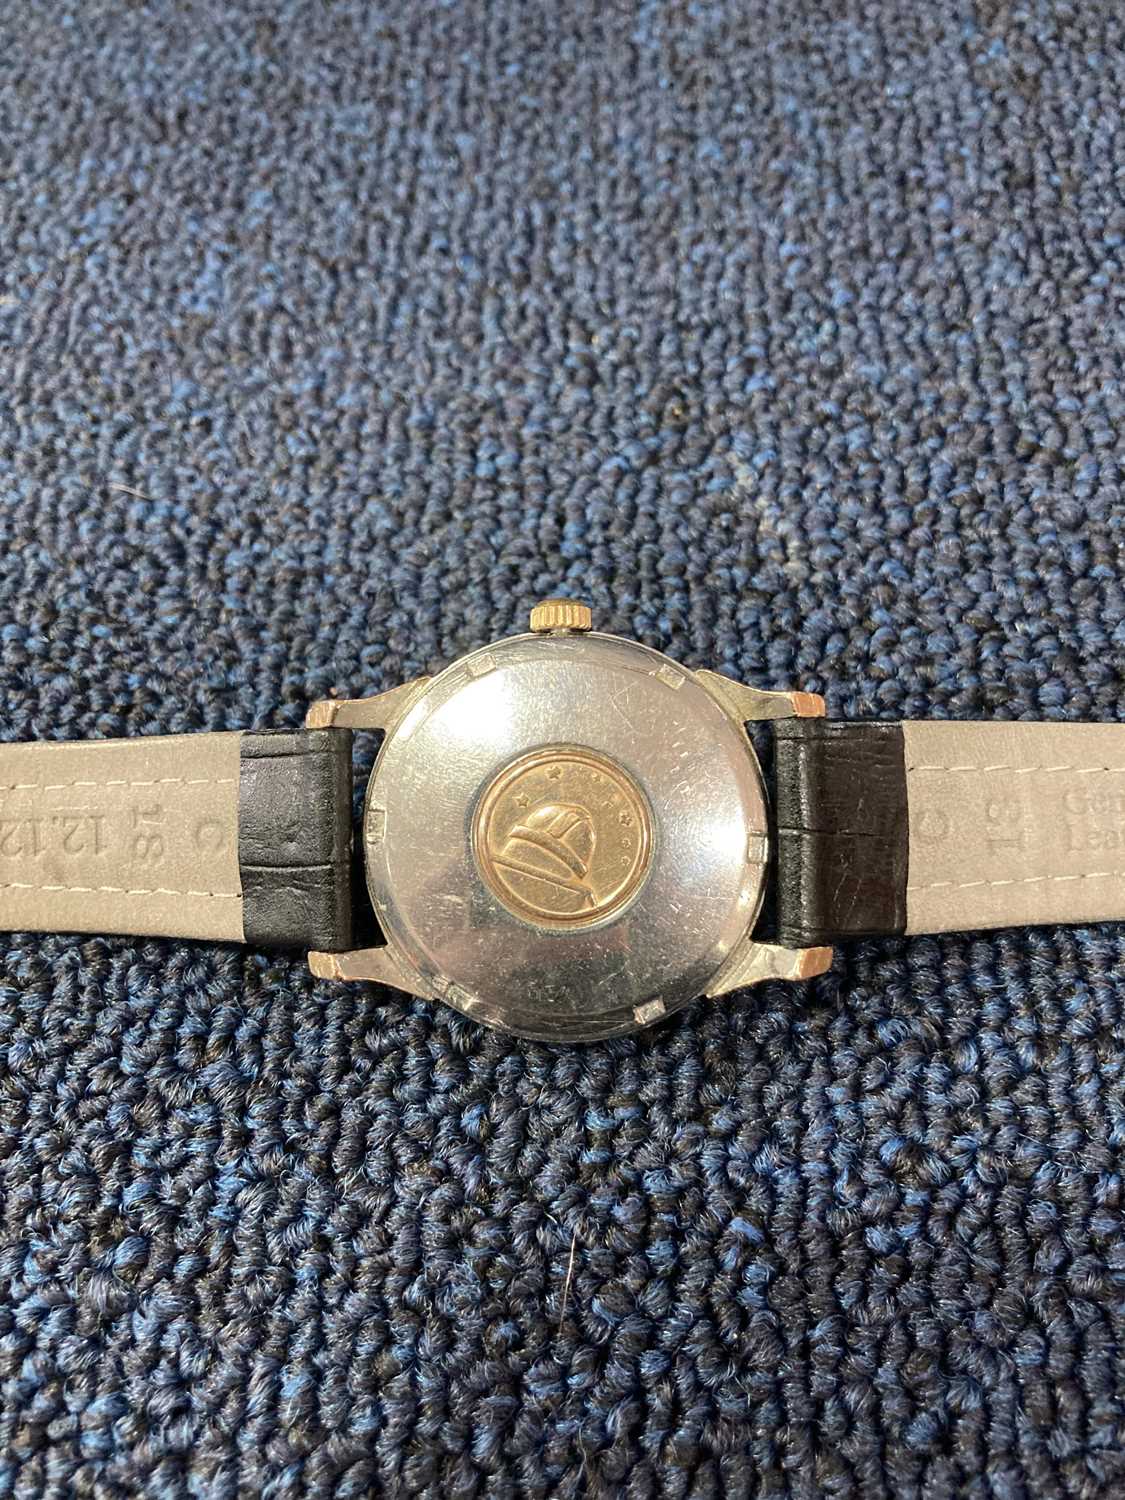 OMEGA CONSTELLATION GOLD PLATED AUTOMATIC WRIST WATCH, - Image 2 of 2